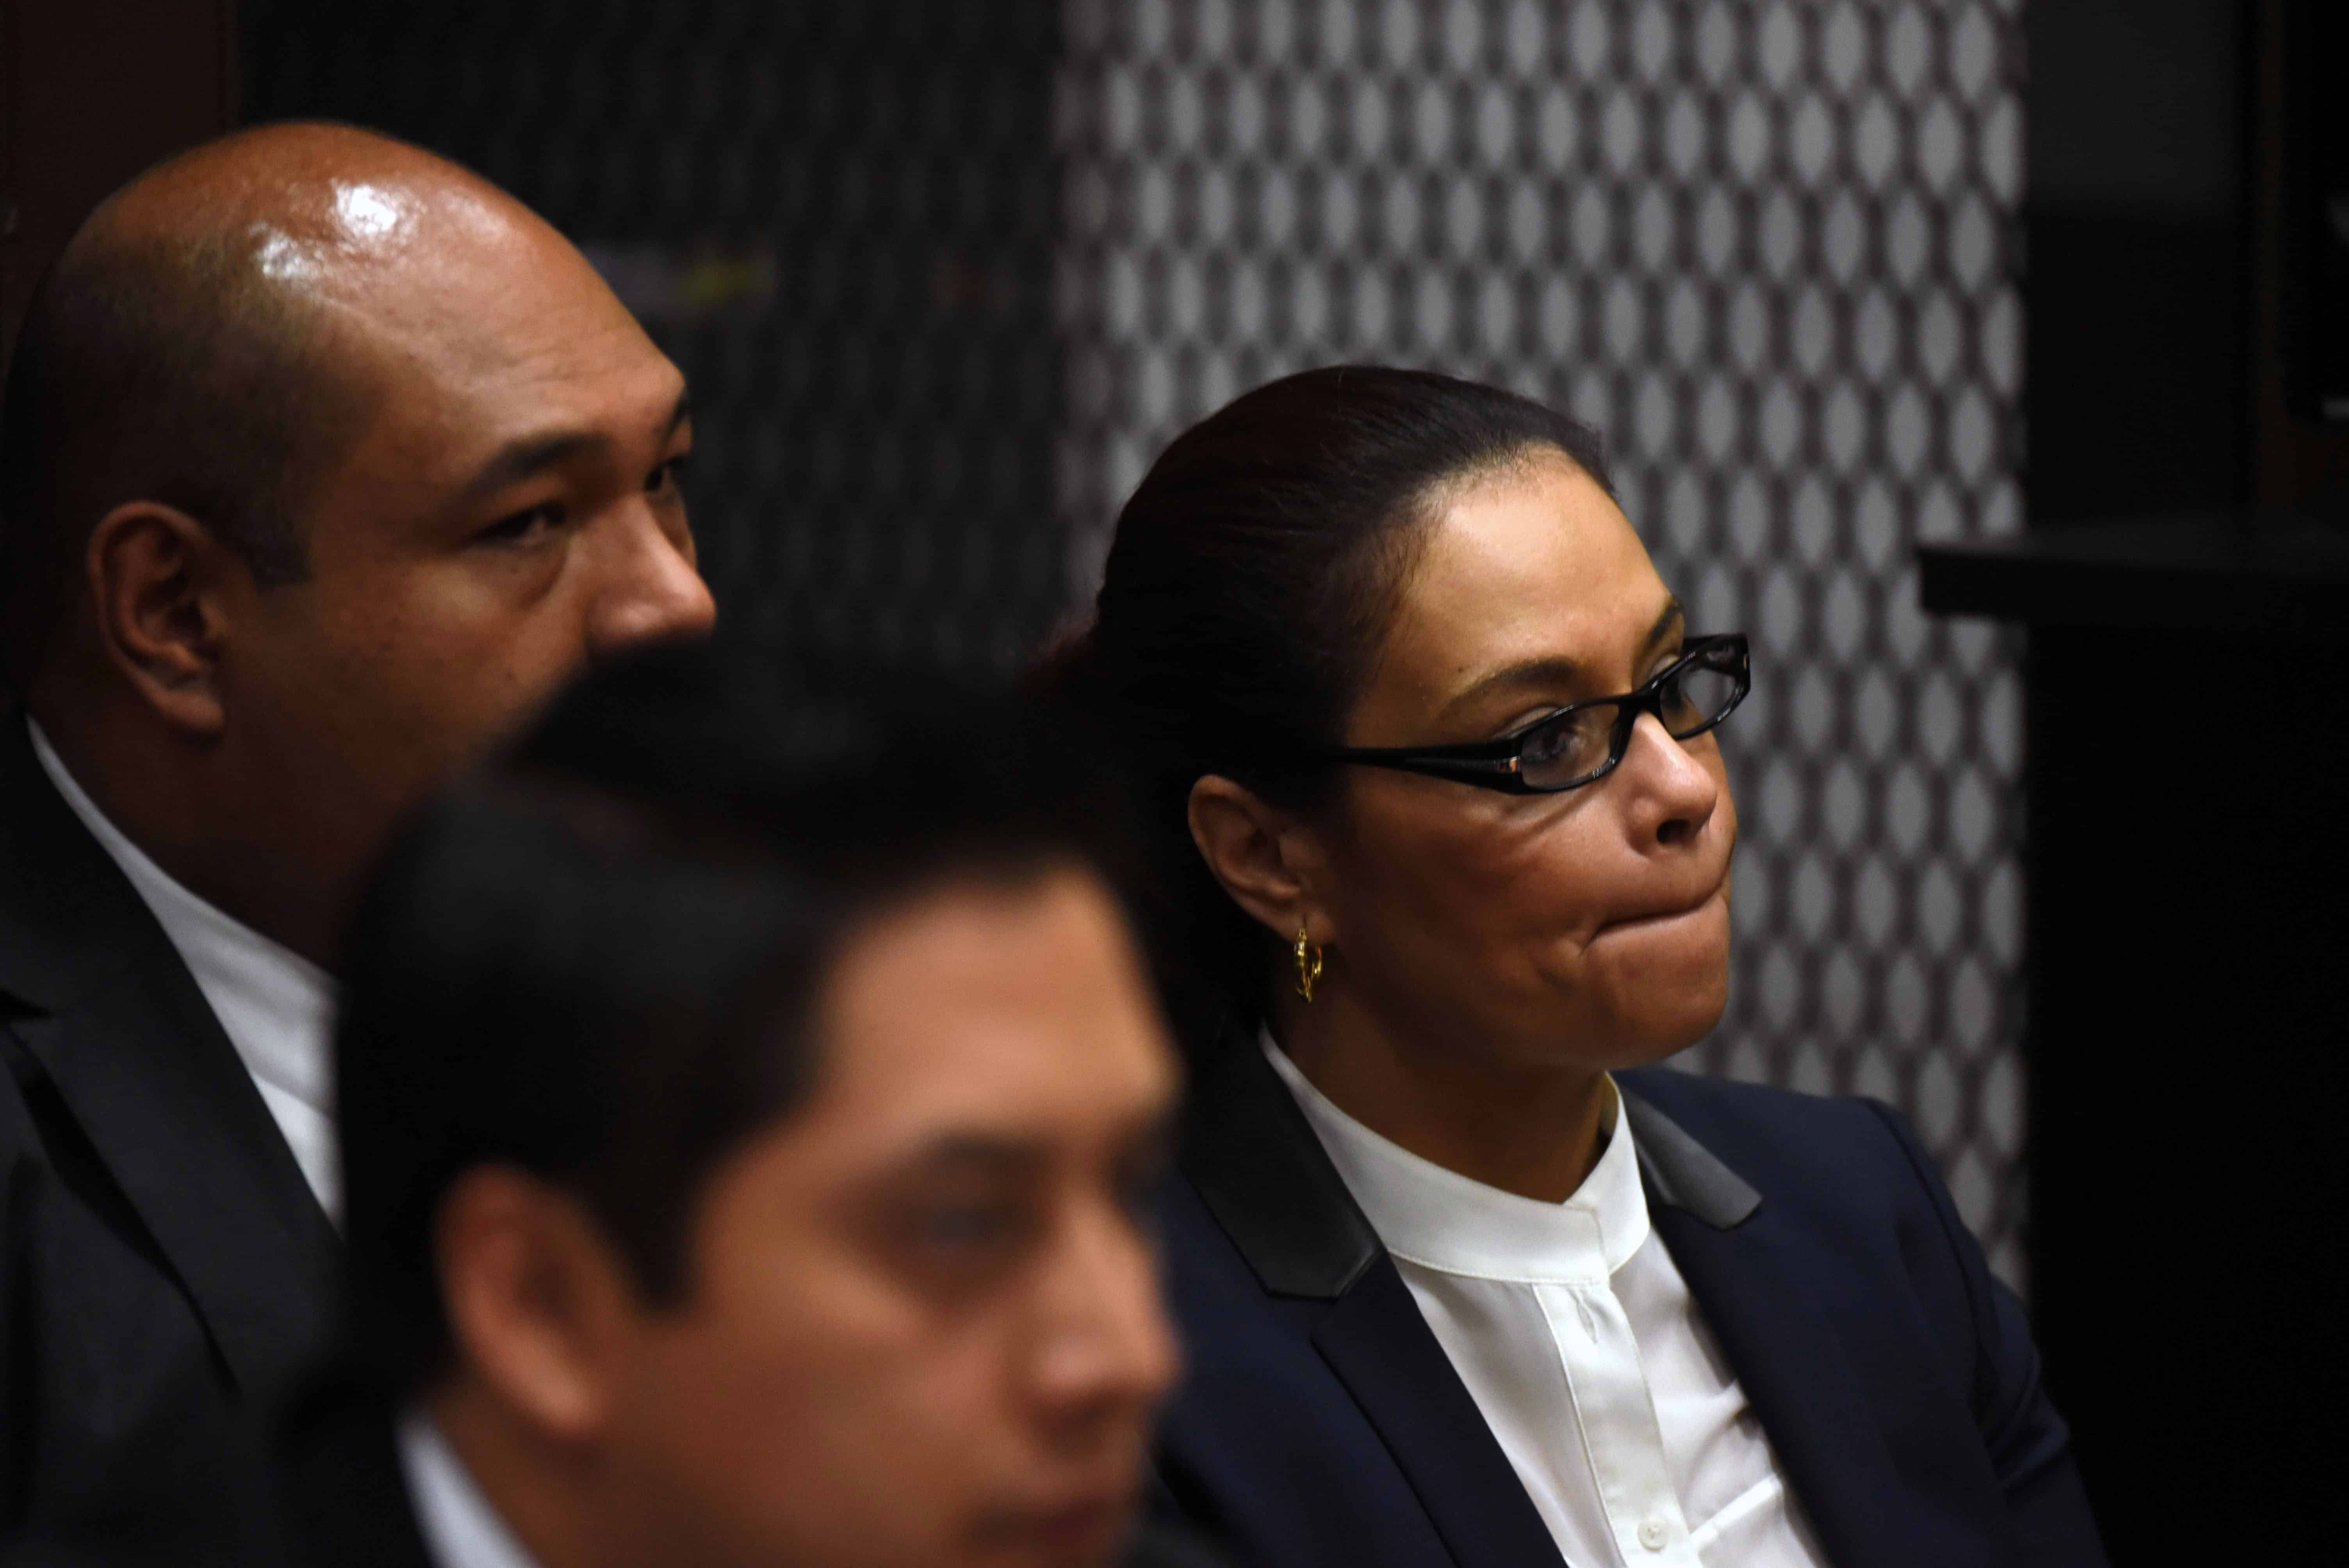 Guatemala's former Vice President Roxana Baldetti attends a hearing in court.